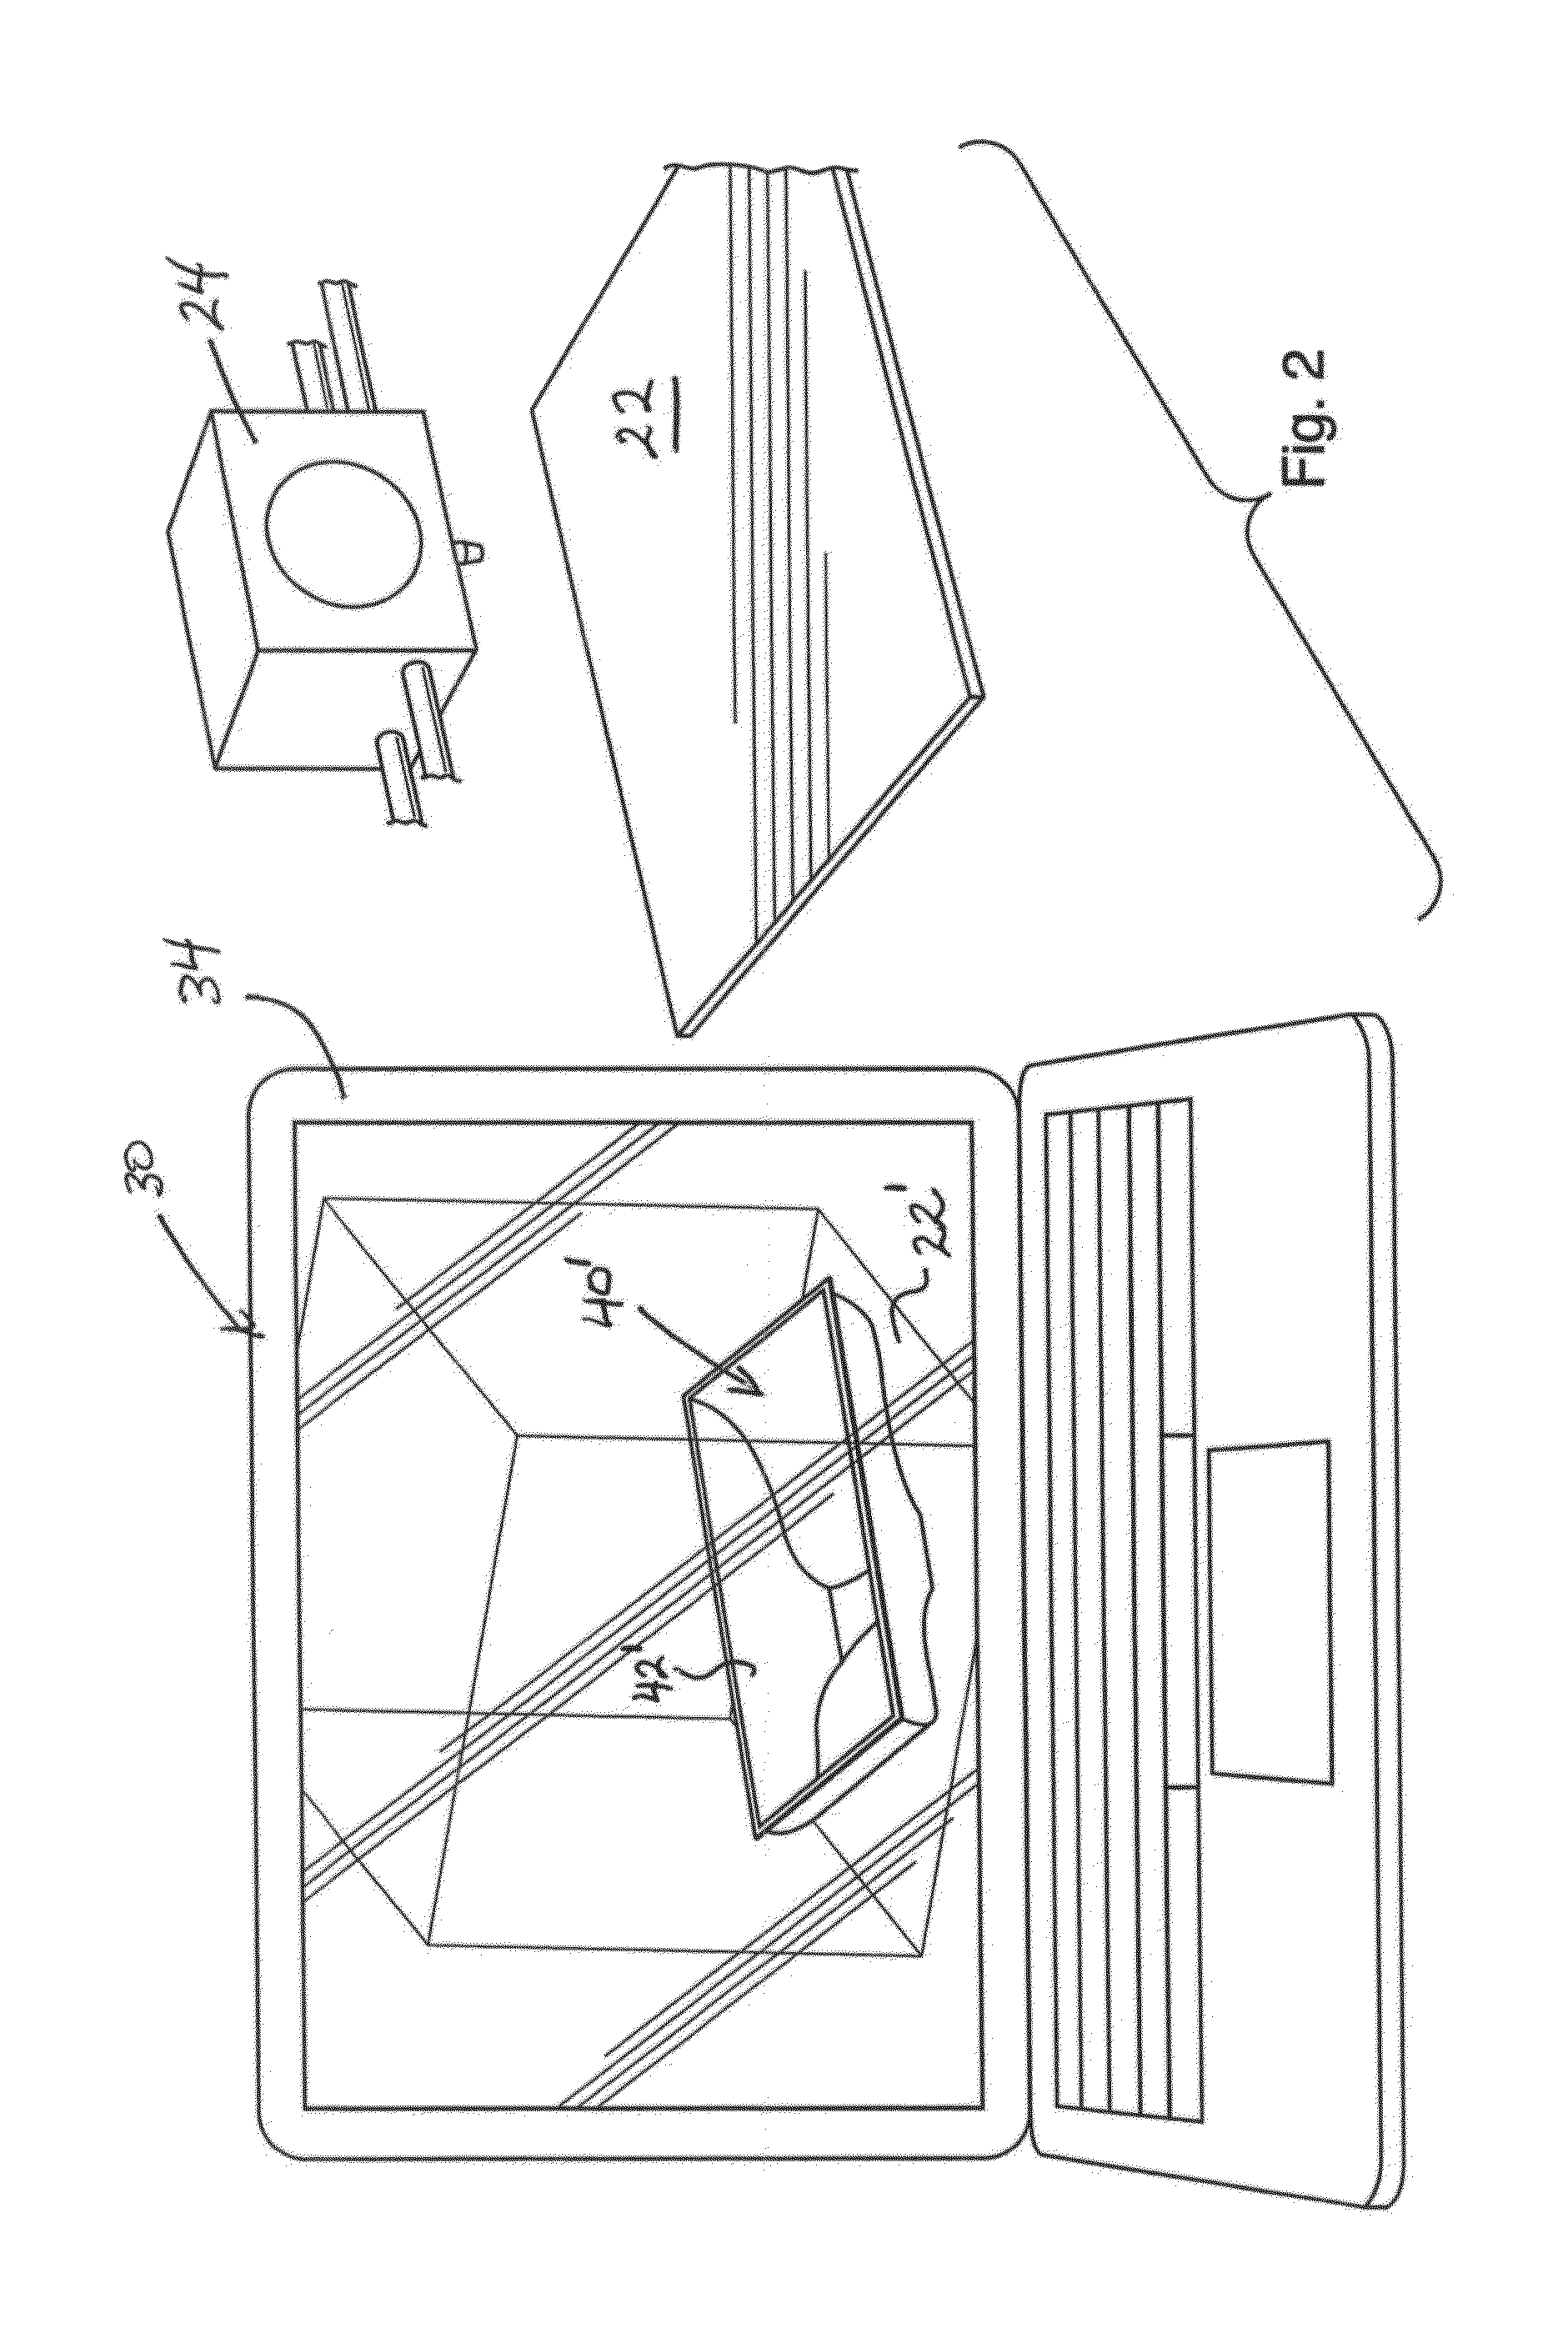 Method of Reducing and Optimising Printed Support Structures in 3D Printing Processes